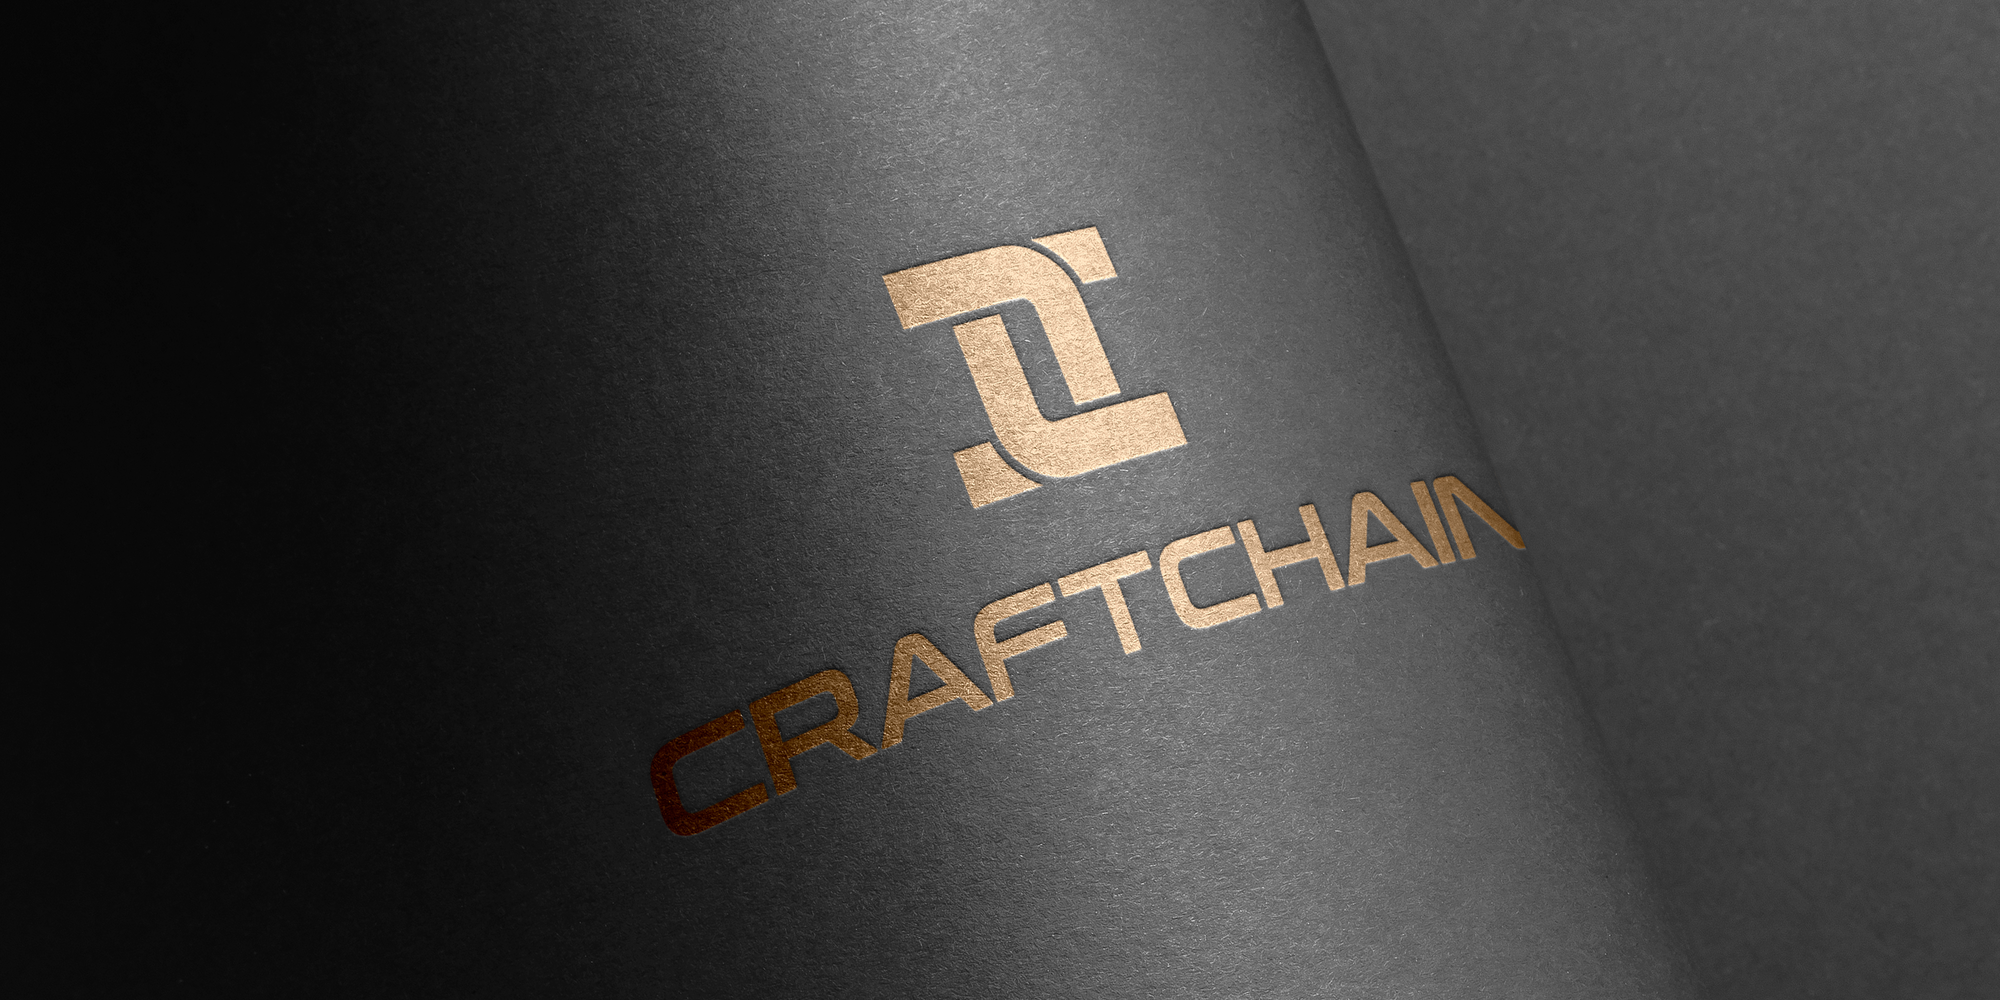 Craftchain Disrupts Traditional Watch Industry with Innovative Subscription Model and Unique Brand Story